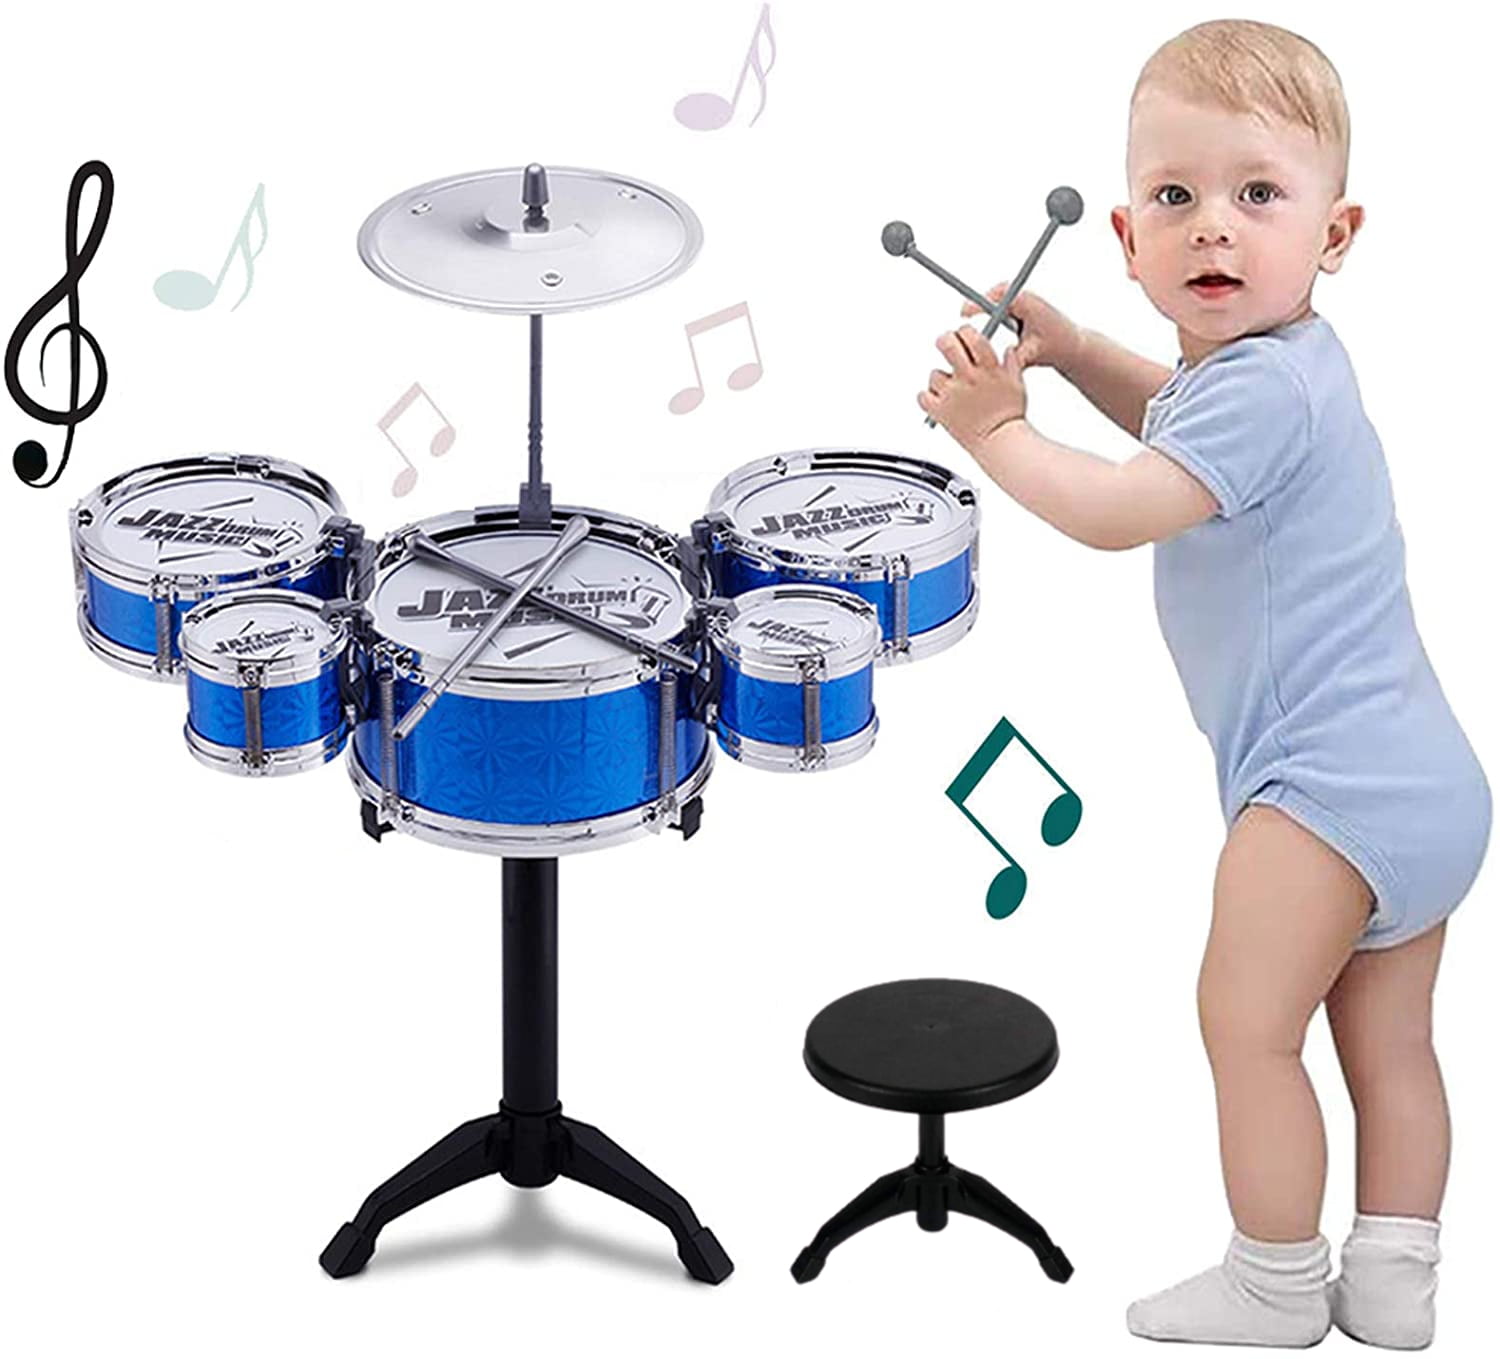 ADHW Pink Childs Kids Drum Kit Musical Toy Jazz Band Sound Drums Play Set With Stool 